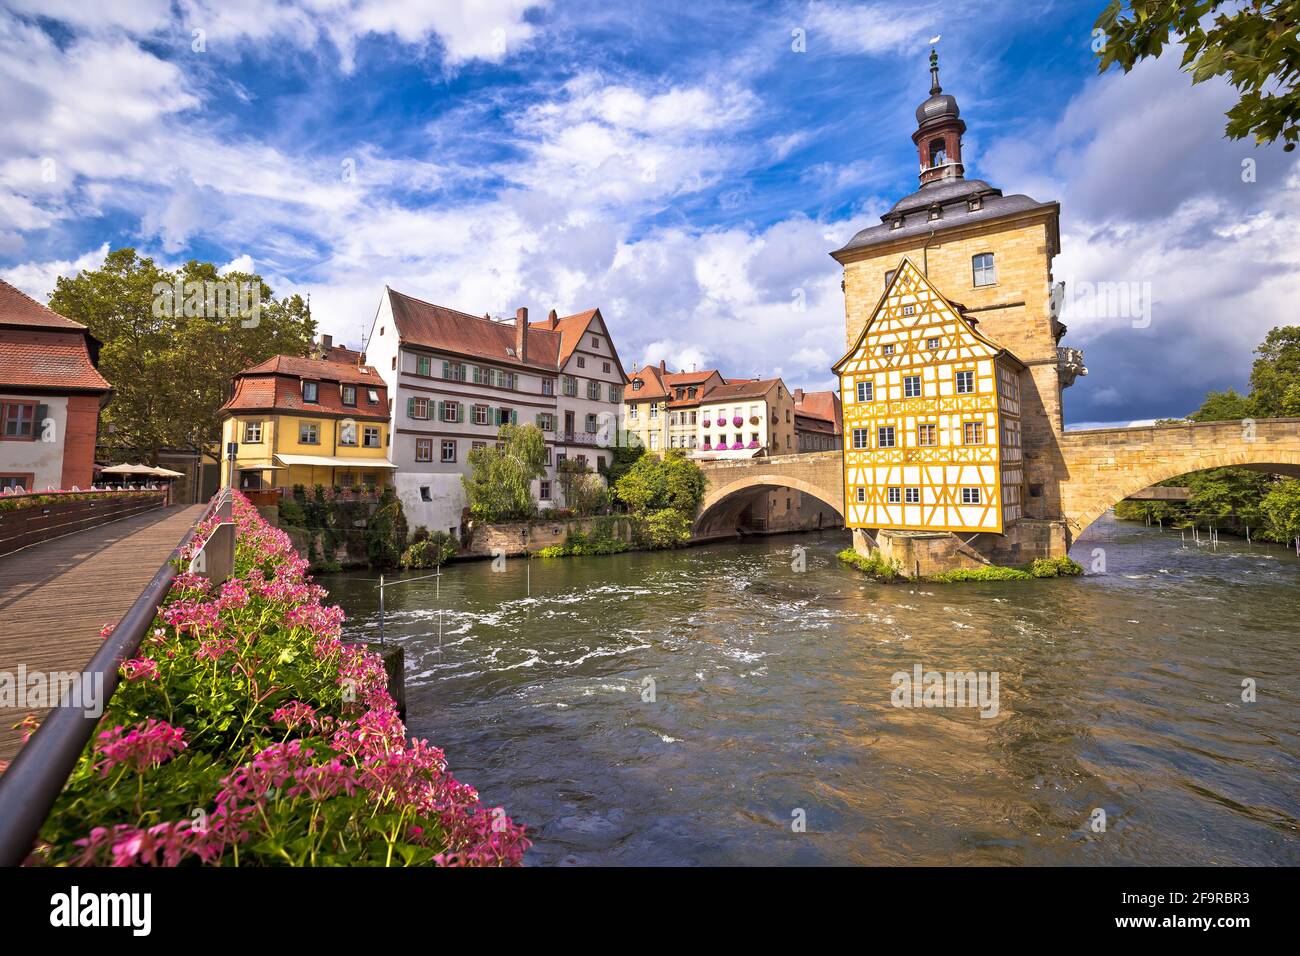 Bamberg. Scenic view of Old Town Hall of Bamberg (Altes Rathaus) with two bridges over the Regnitz river, Bavaria region of Germany Stock Photo